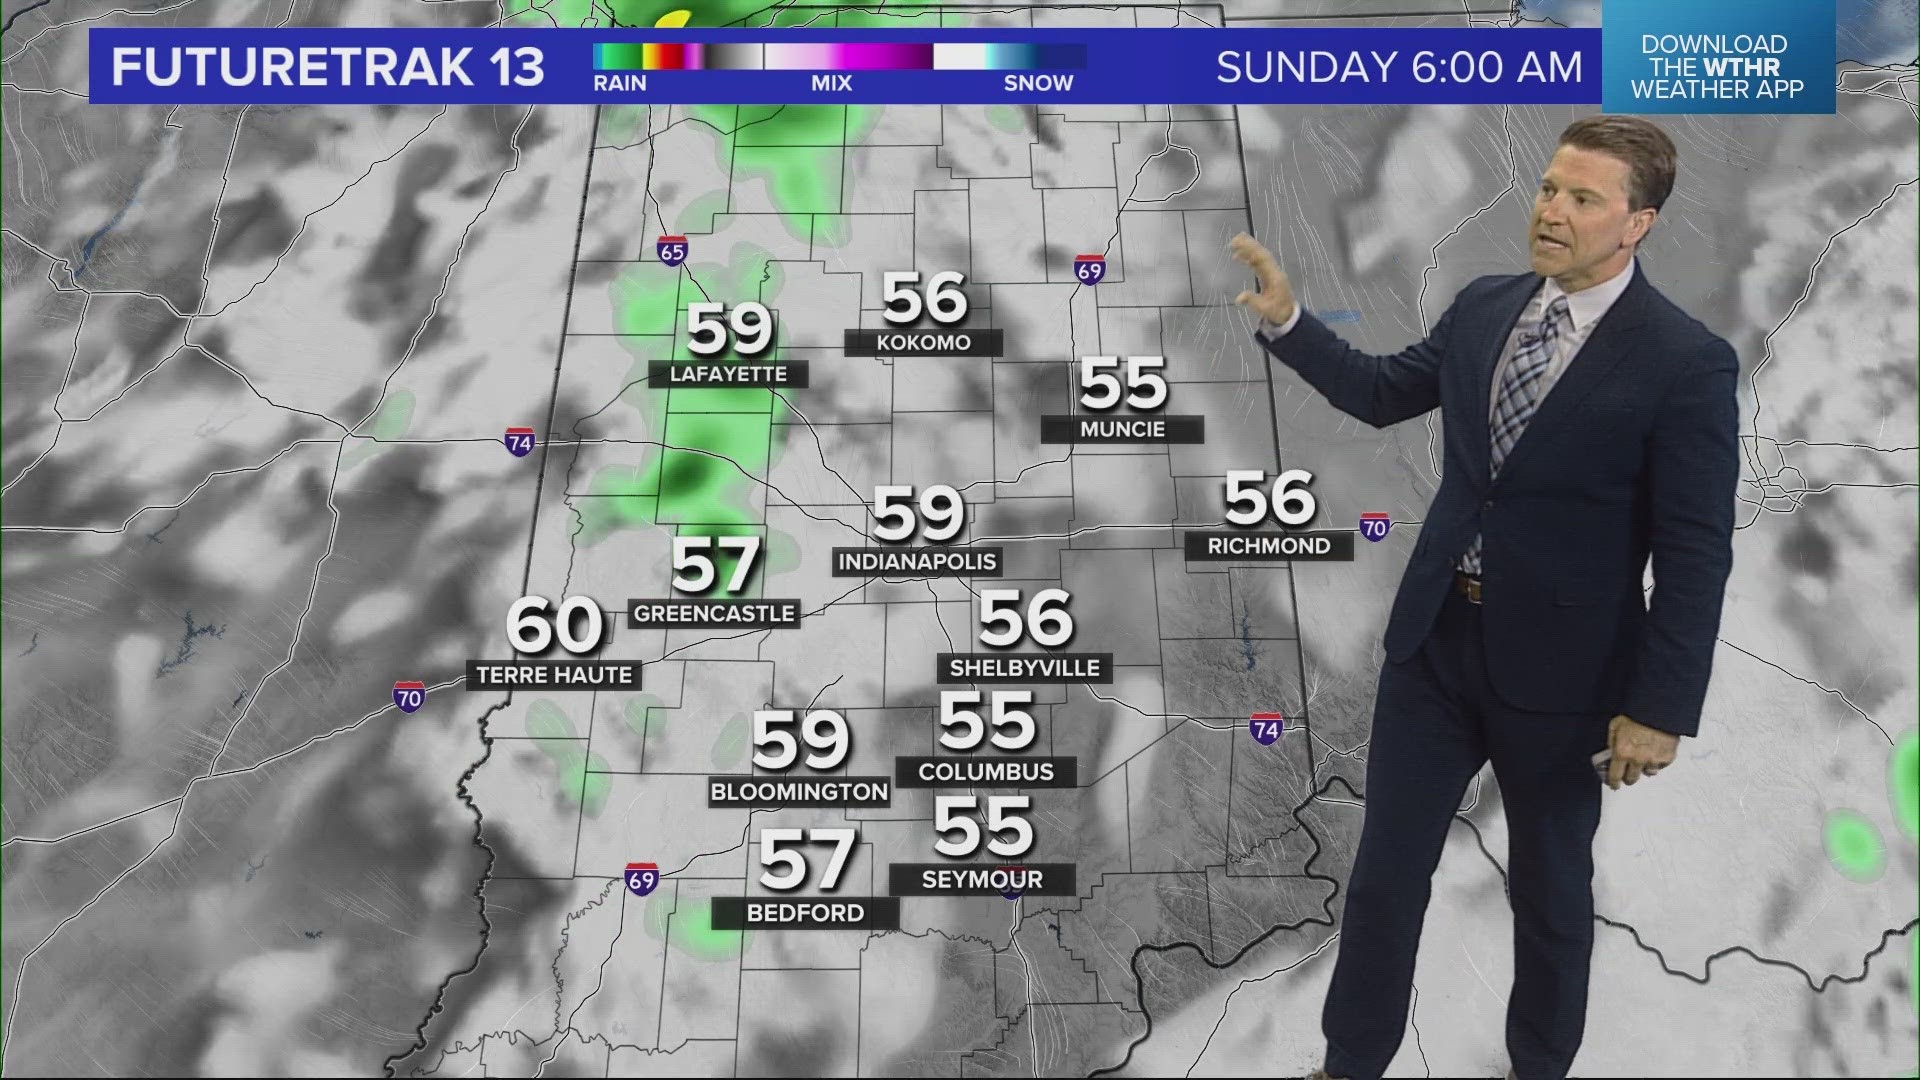 13News meteorologist Sean Ash previews Saturday's weather forecast.